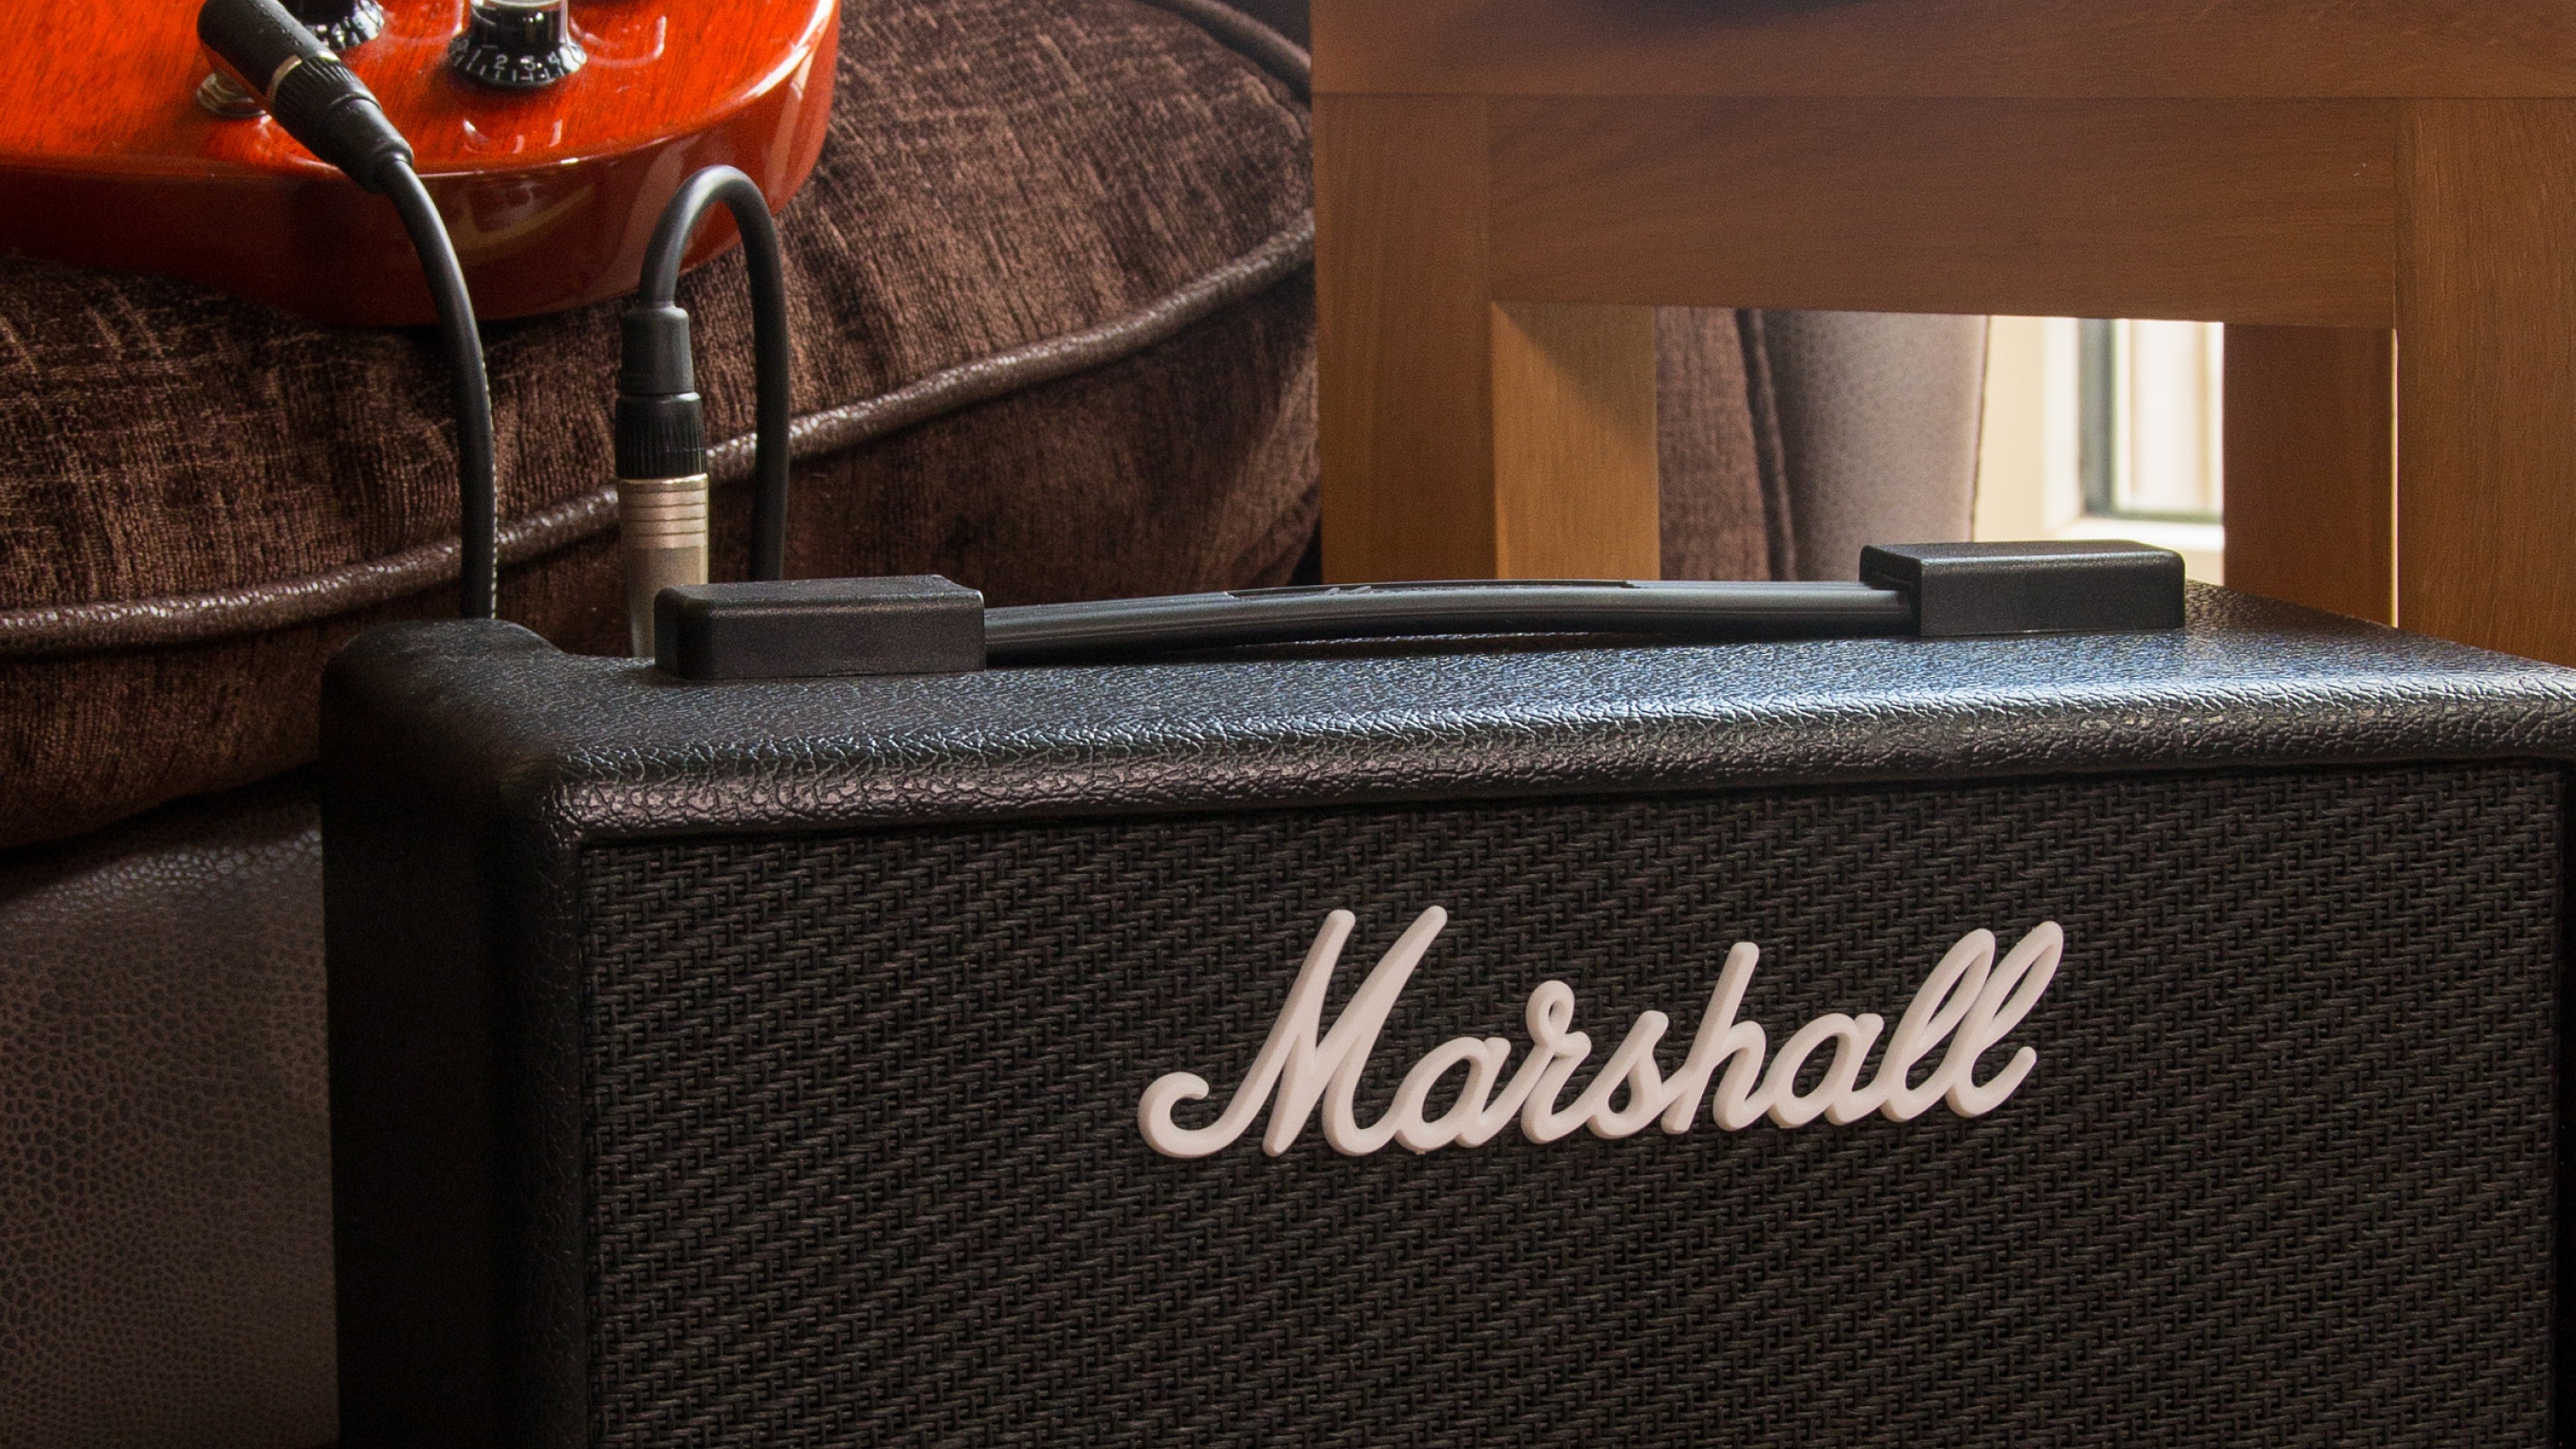 CODE25 Combo digital amp controlled with Bluetooth | Marshall.com